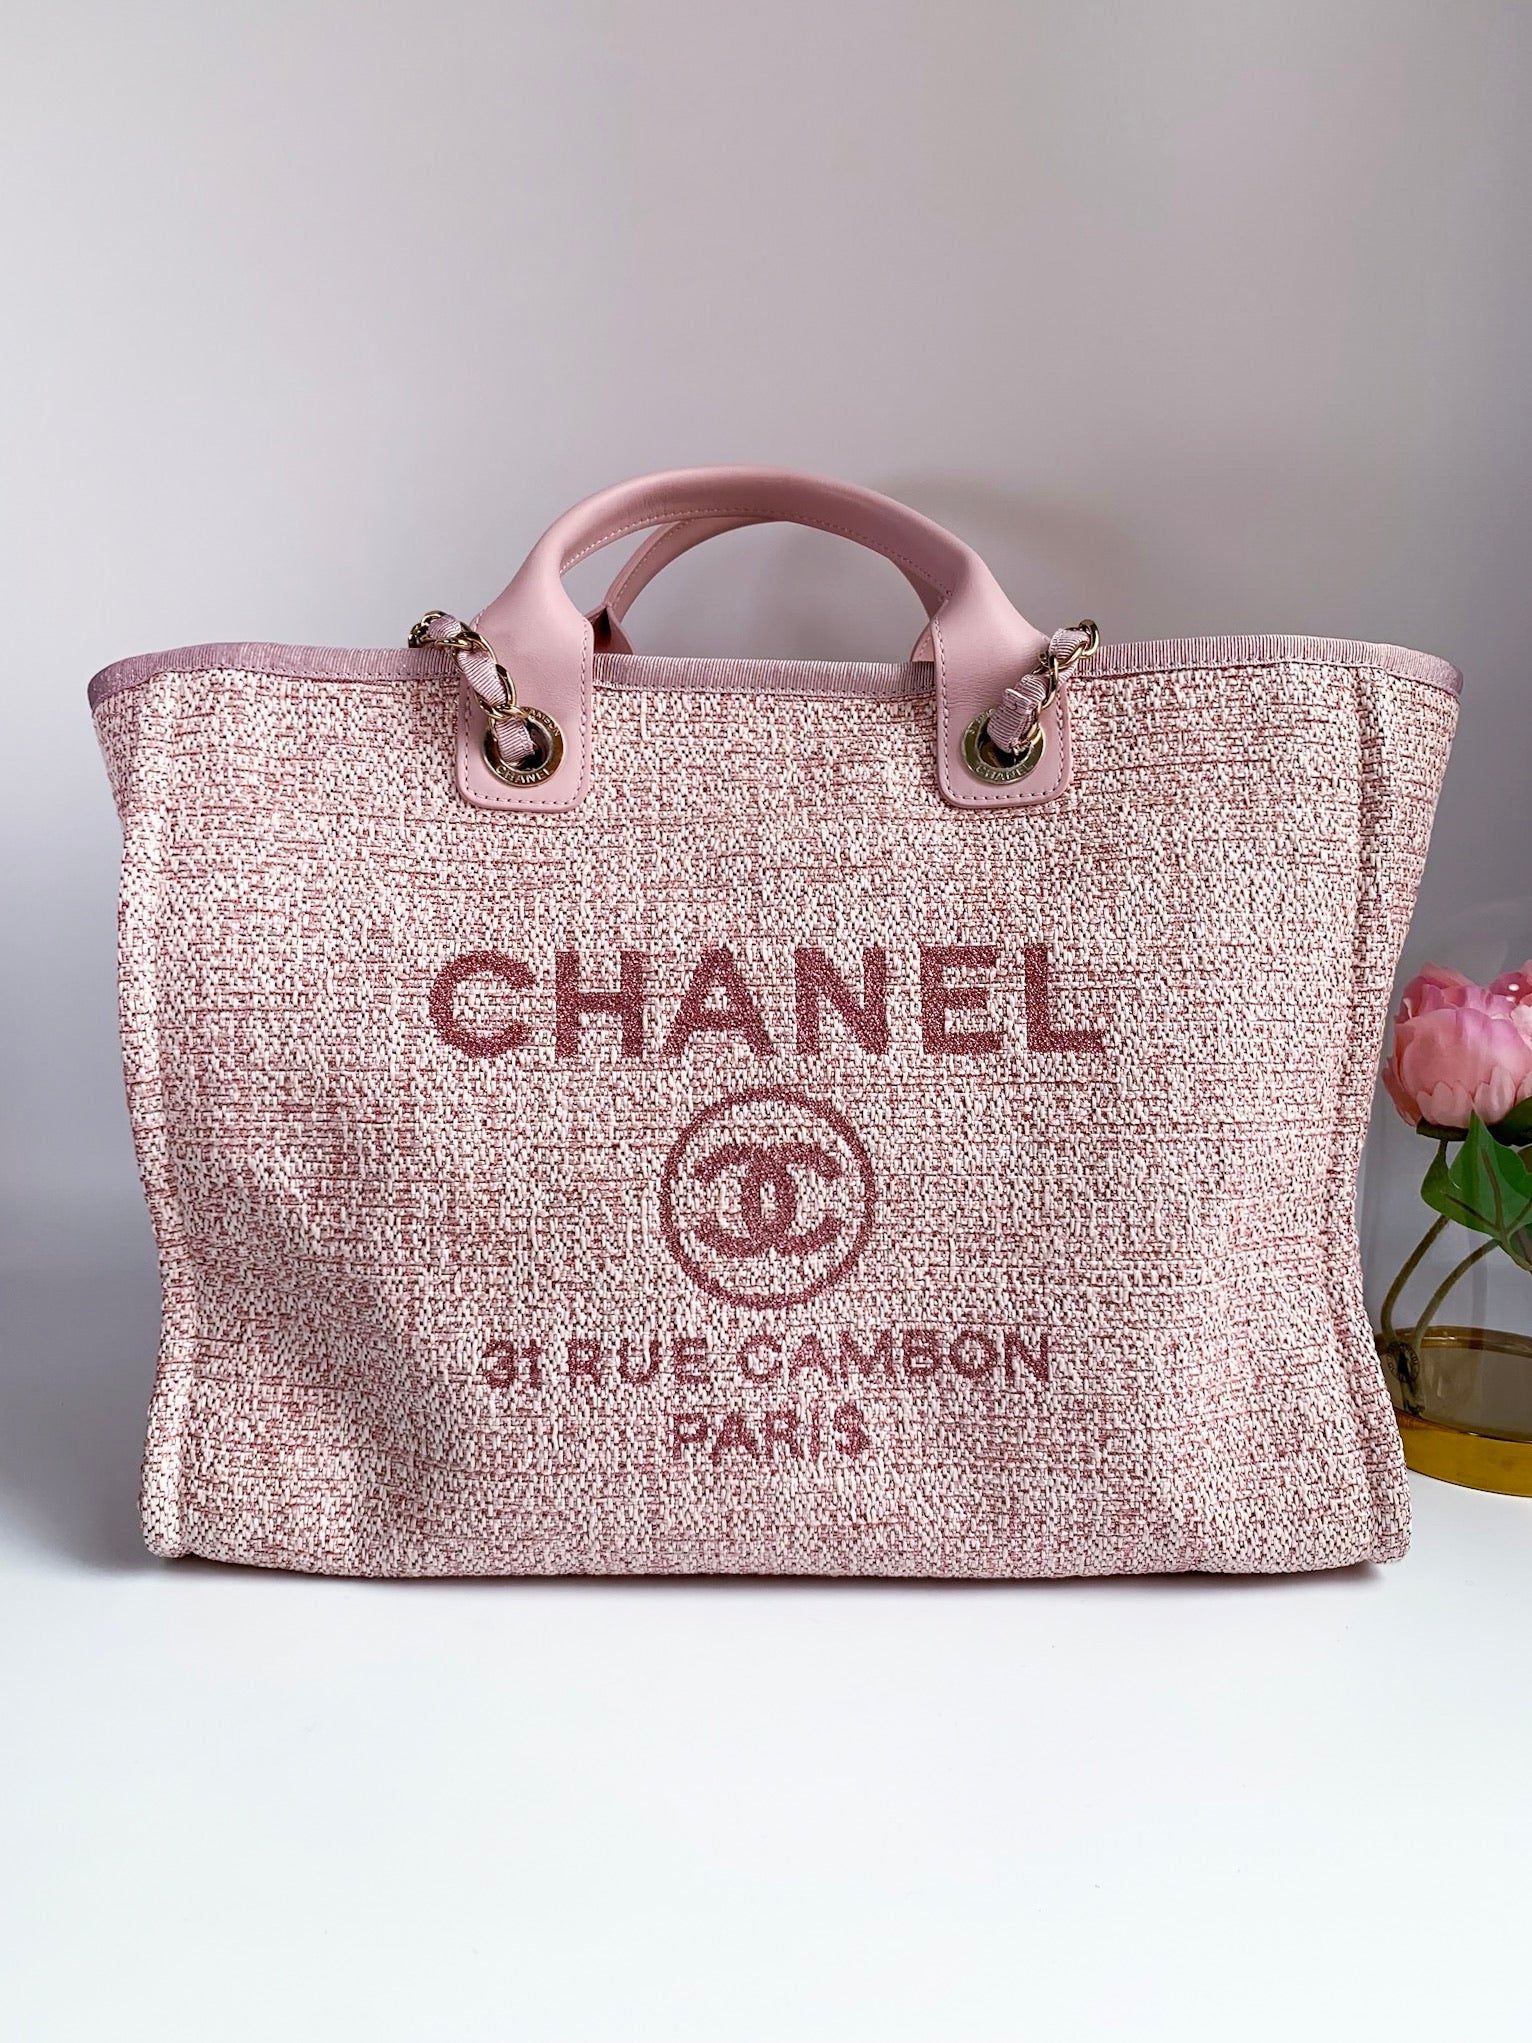 chanel pink deauville tote